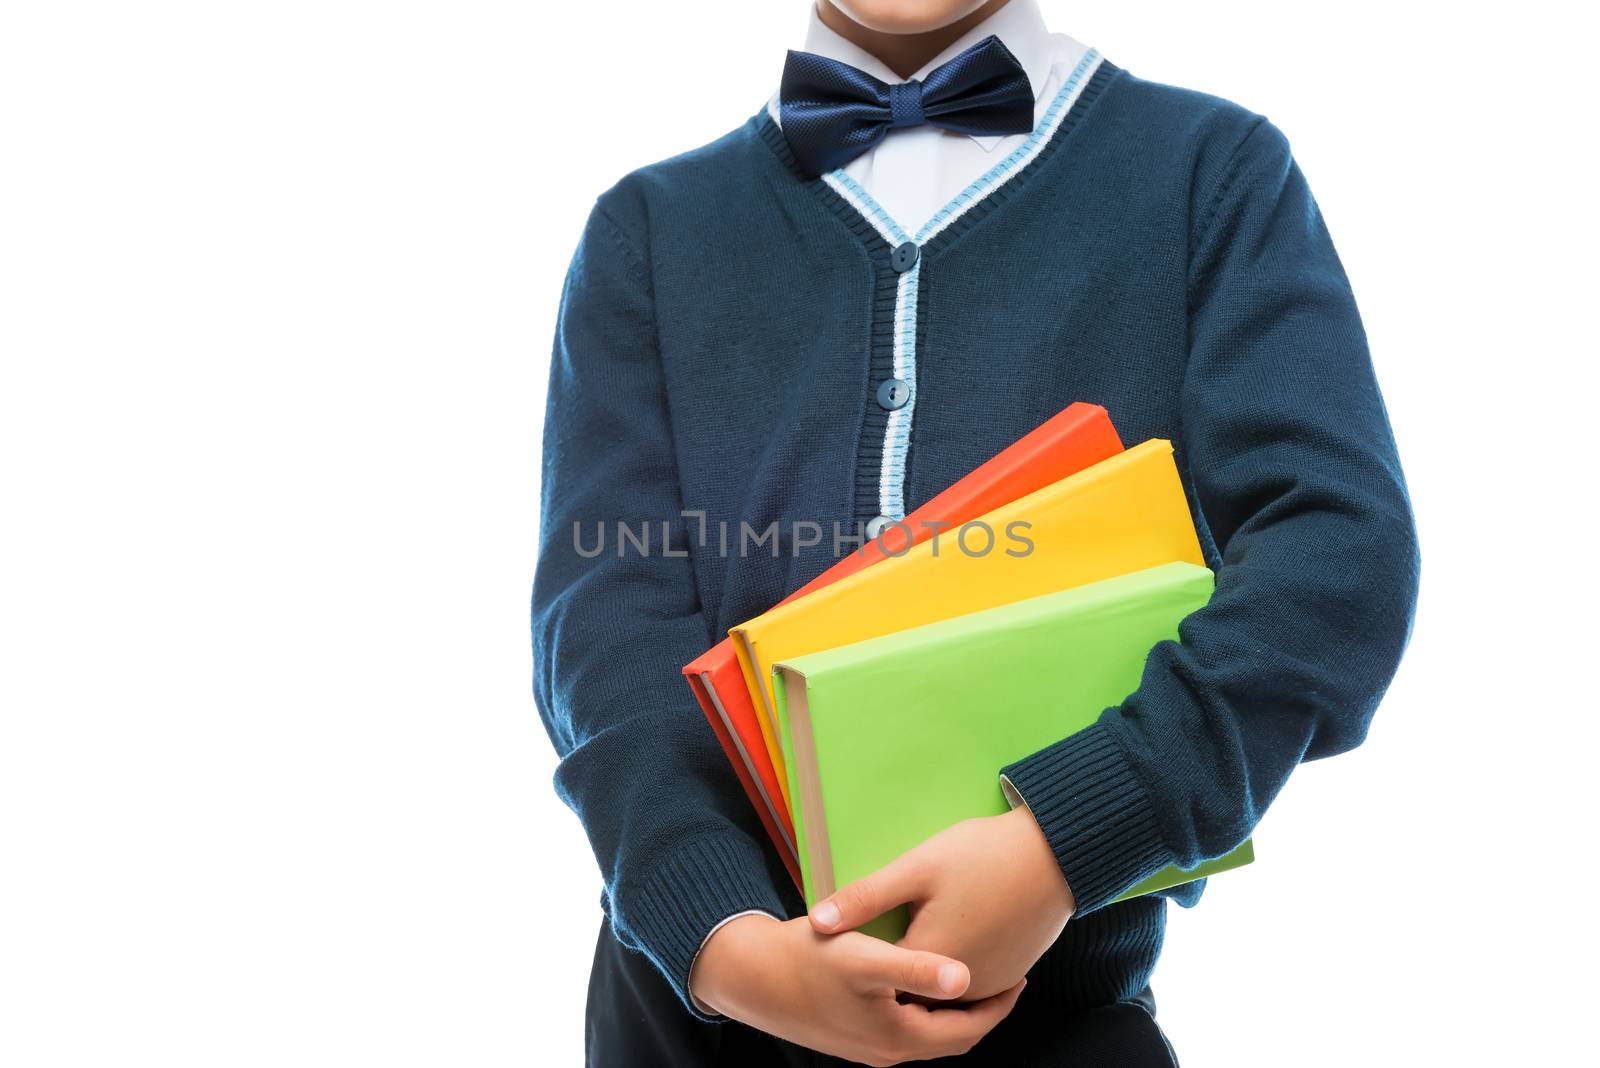 schoolboy in uniform with books on white background by kosmsos111